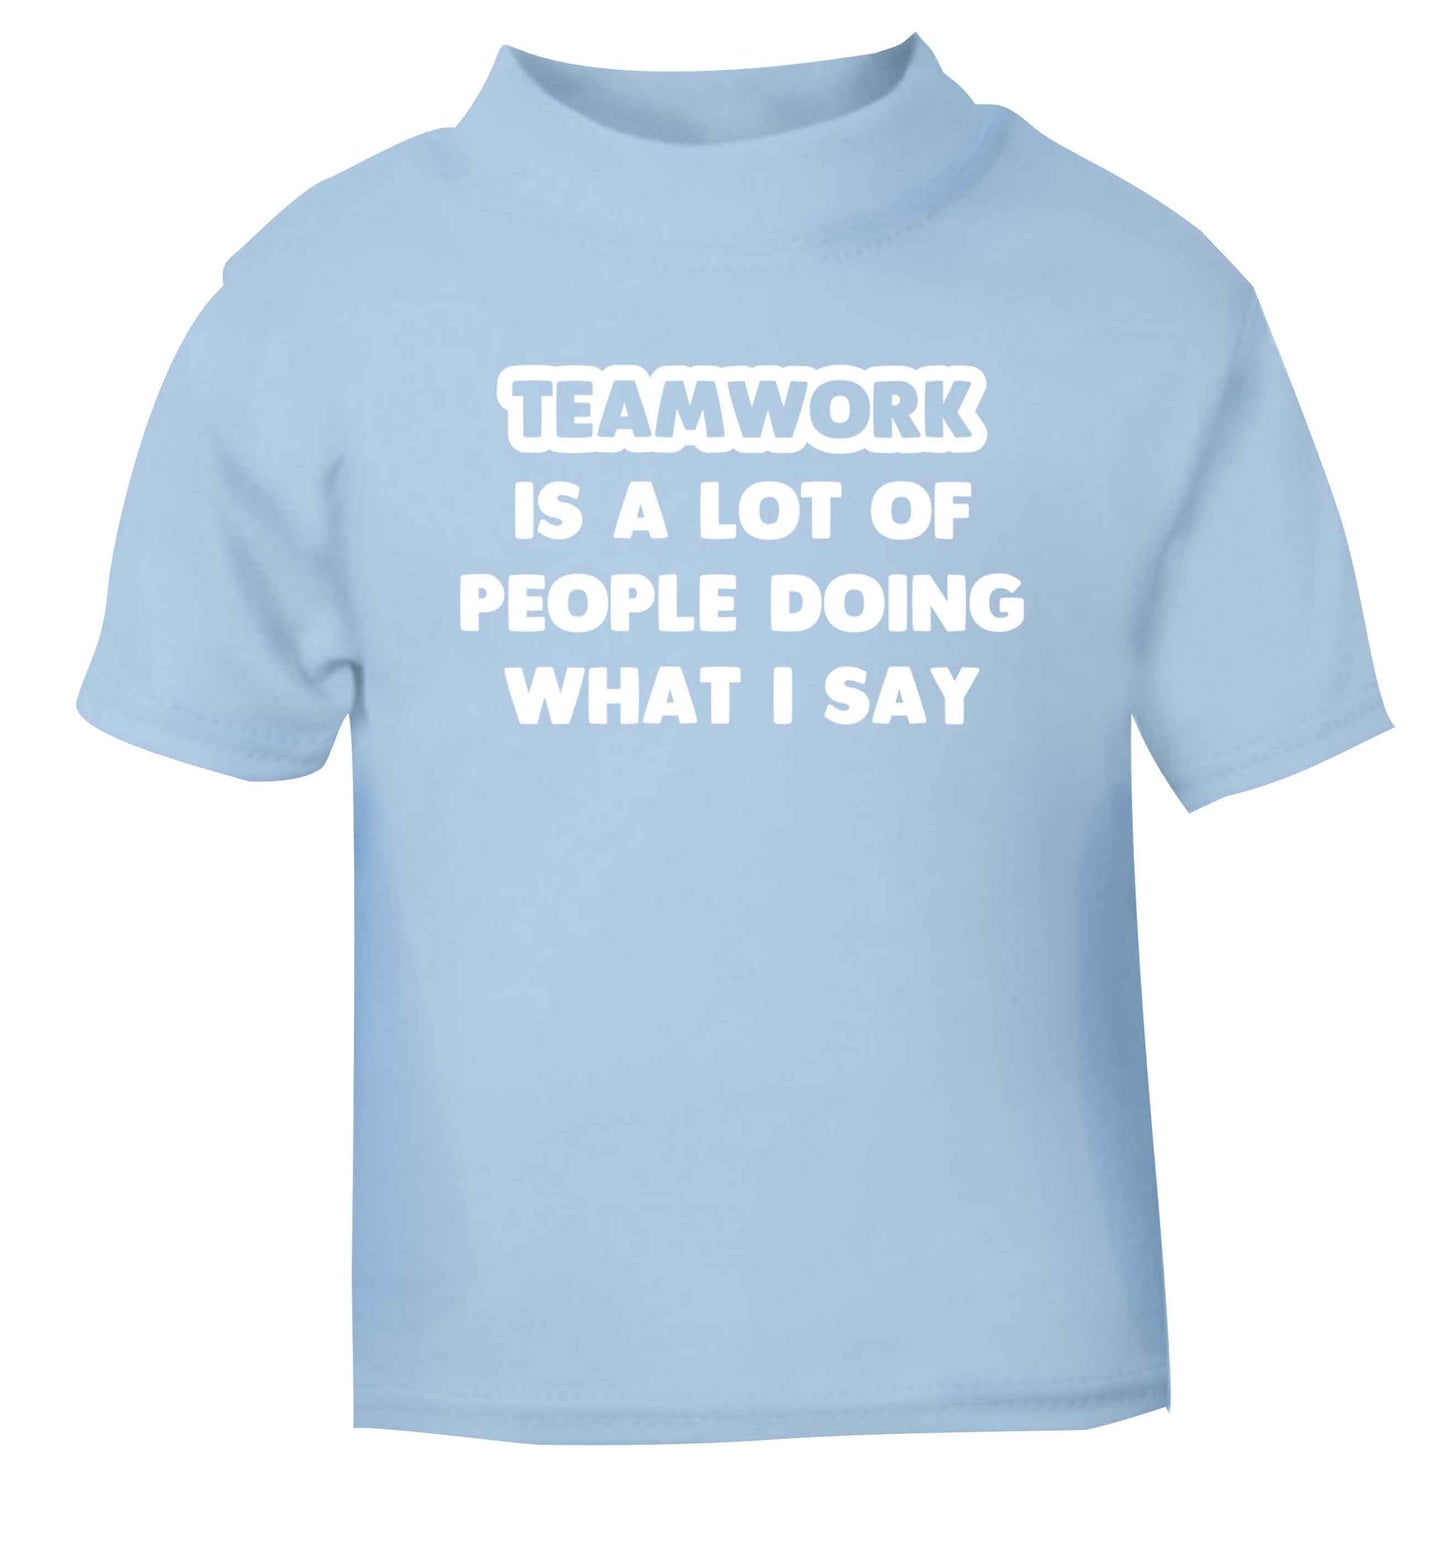 Teamwork is a lot of people doing what I say light blue Baby Toddler Tshirt 2 Years